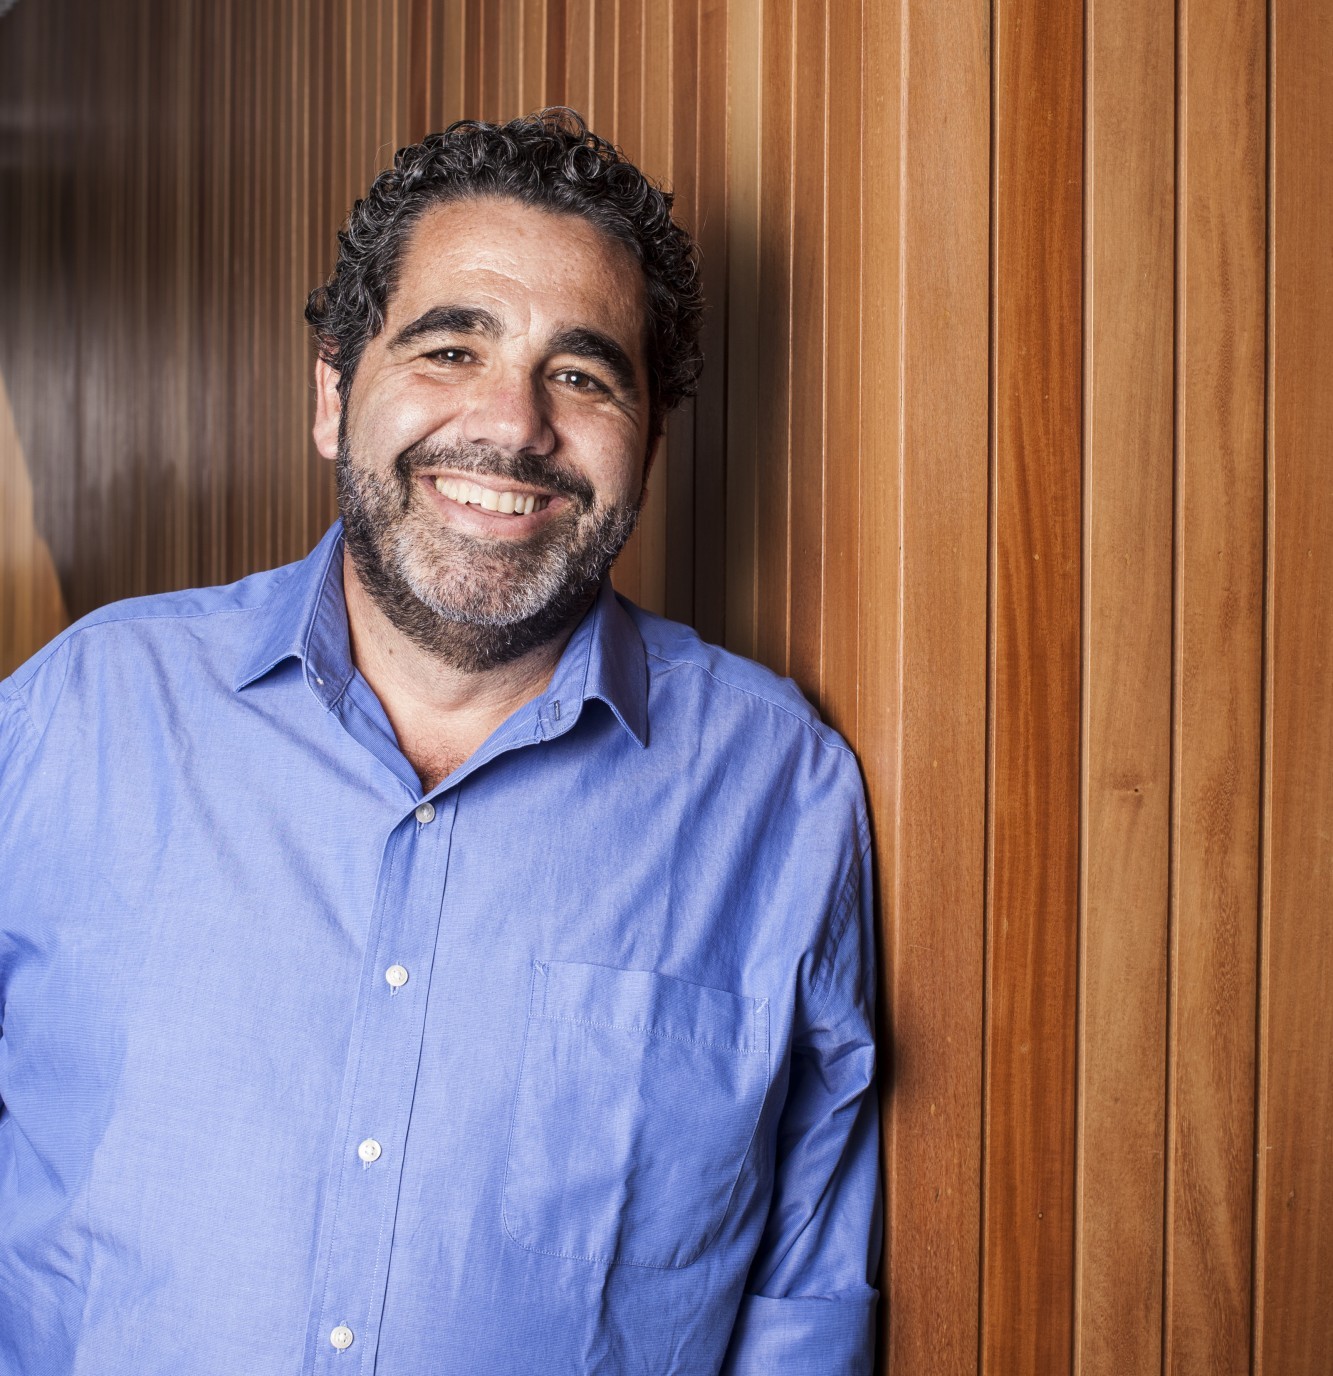 Marcelo is smiling and standing against a background of vertically disposed wood tiles. He is wearing a blue button-down shirt.